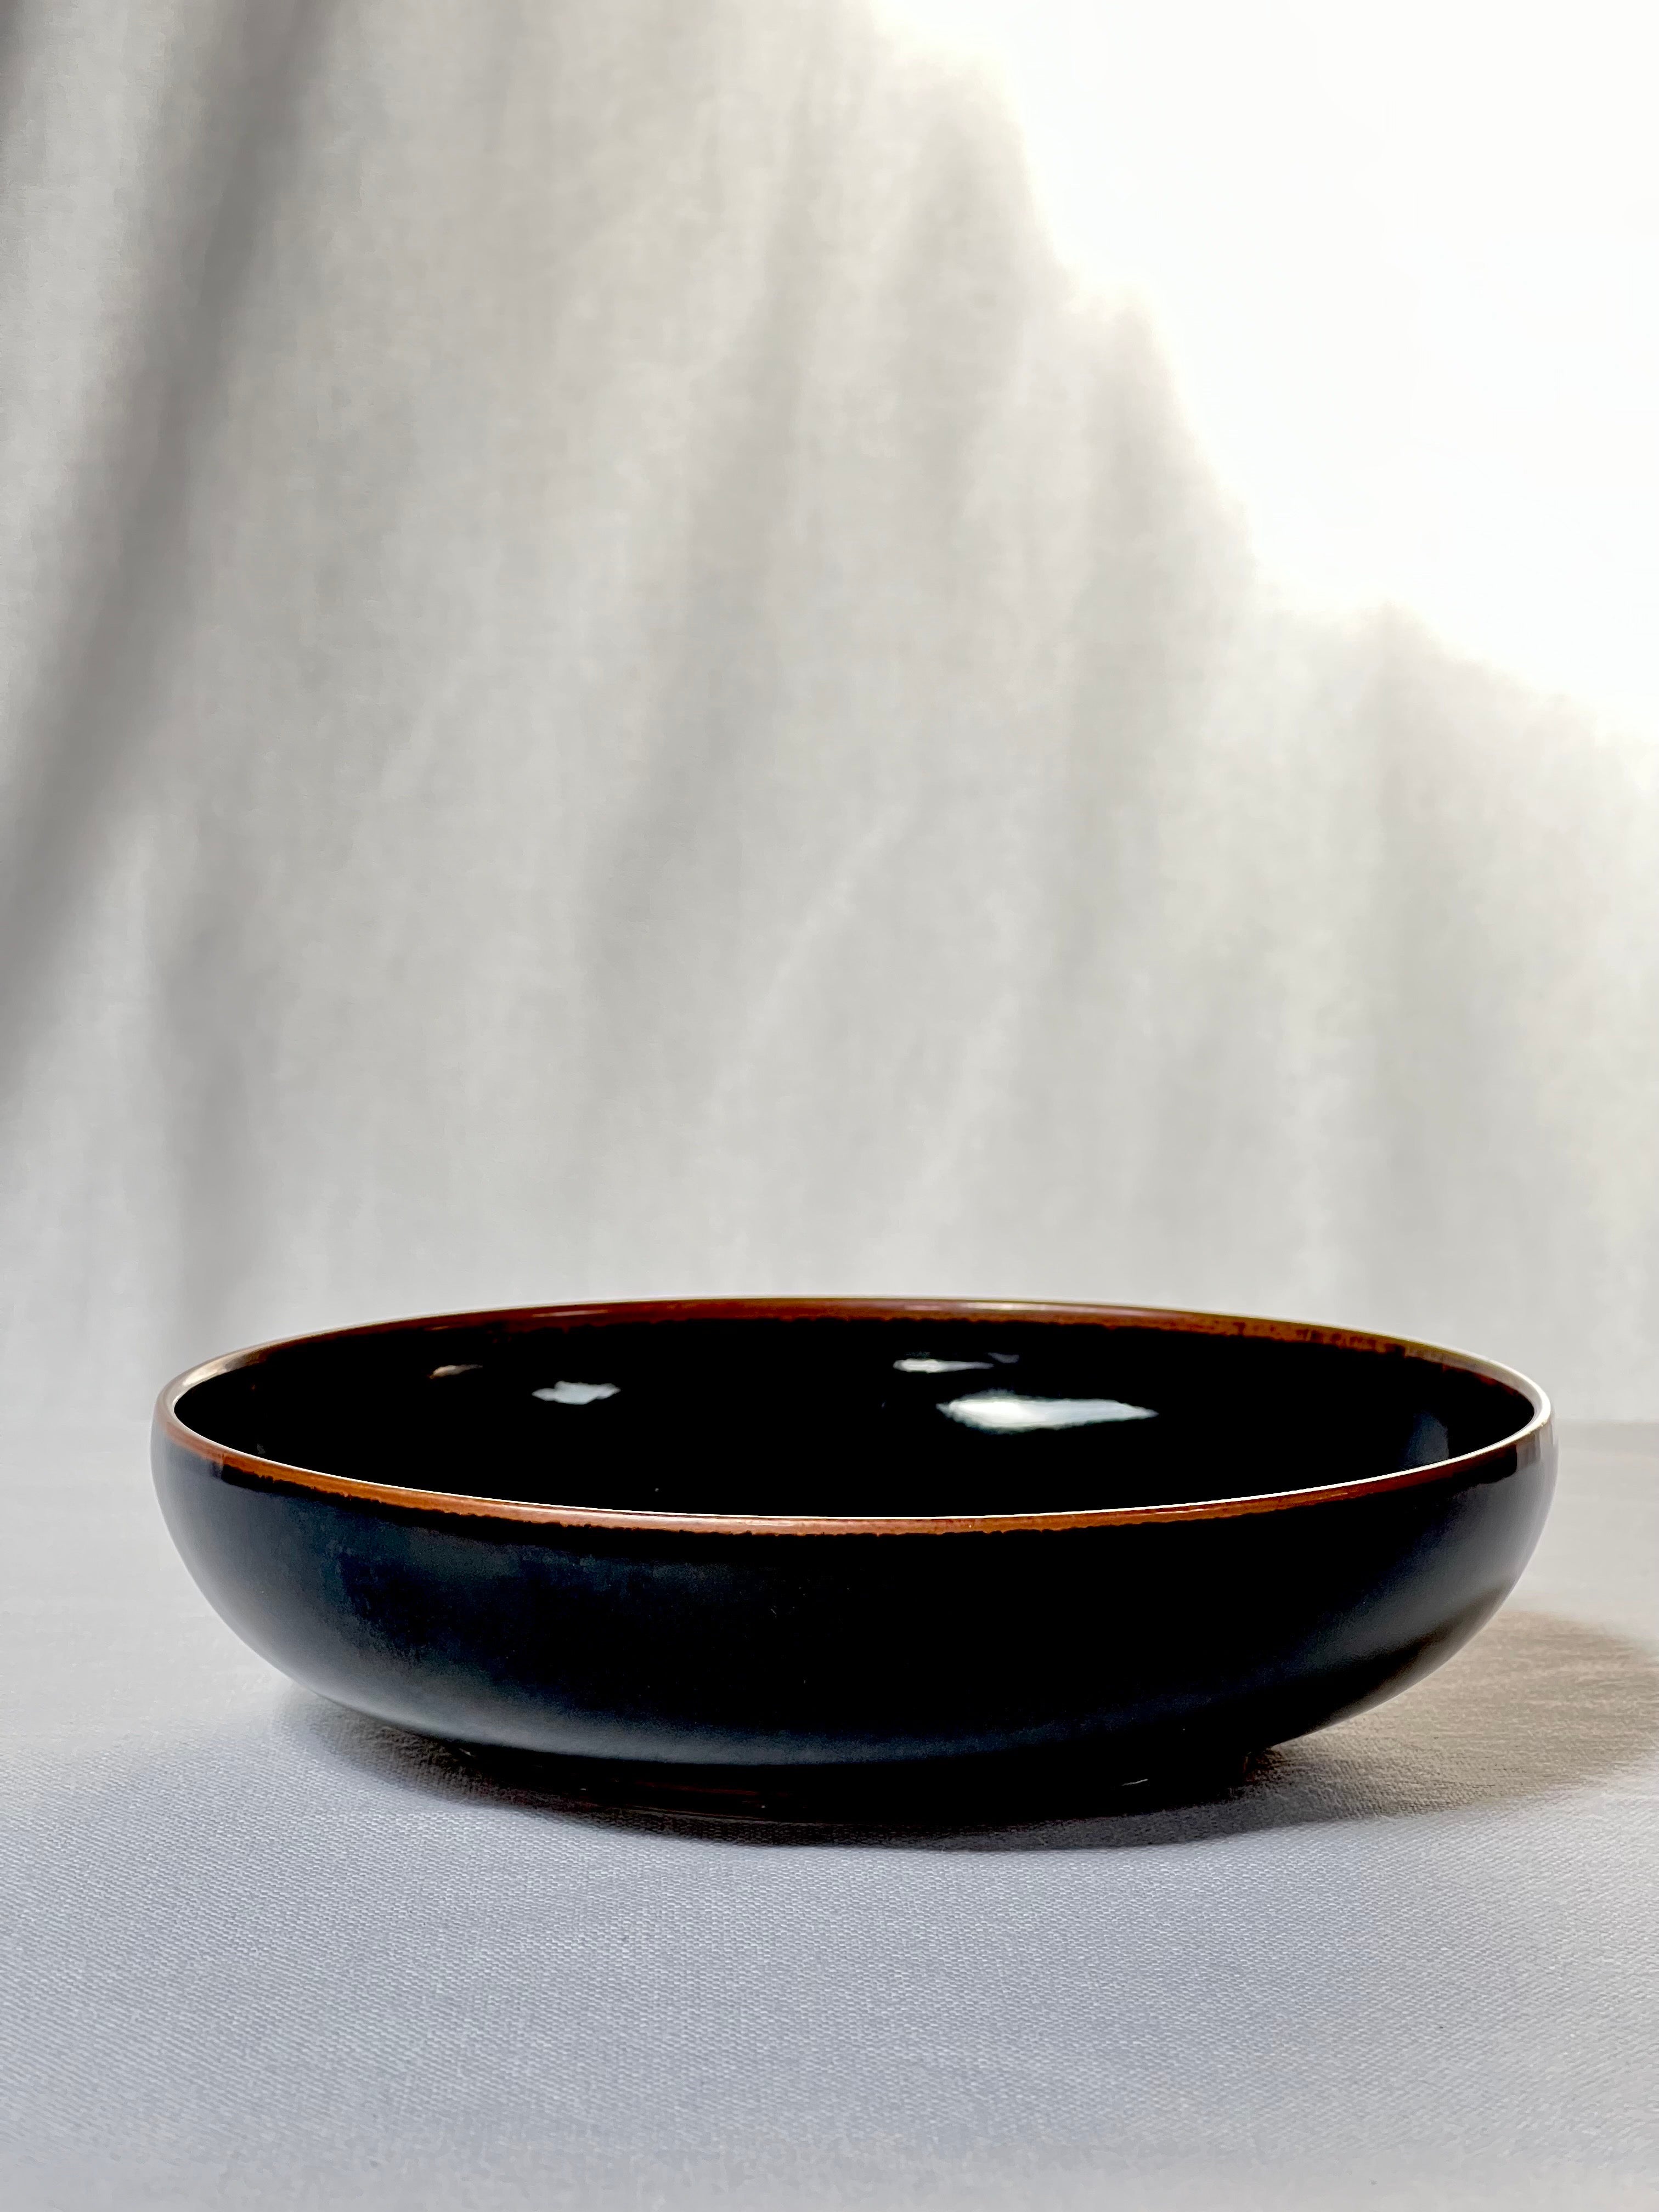 Brown glazed bowl / vide poche by Swedish master ceramicist Stig Lindberg. From light brown on the edges to dark black. It is the Japanese tenmoku glaze also used by the ancient Chinese. Elegant details and nice pattern. Unique piece made by hand